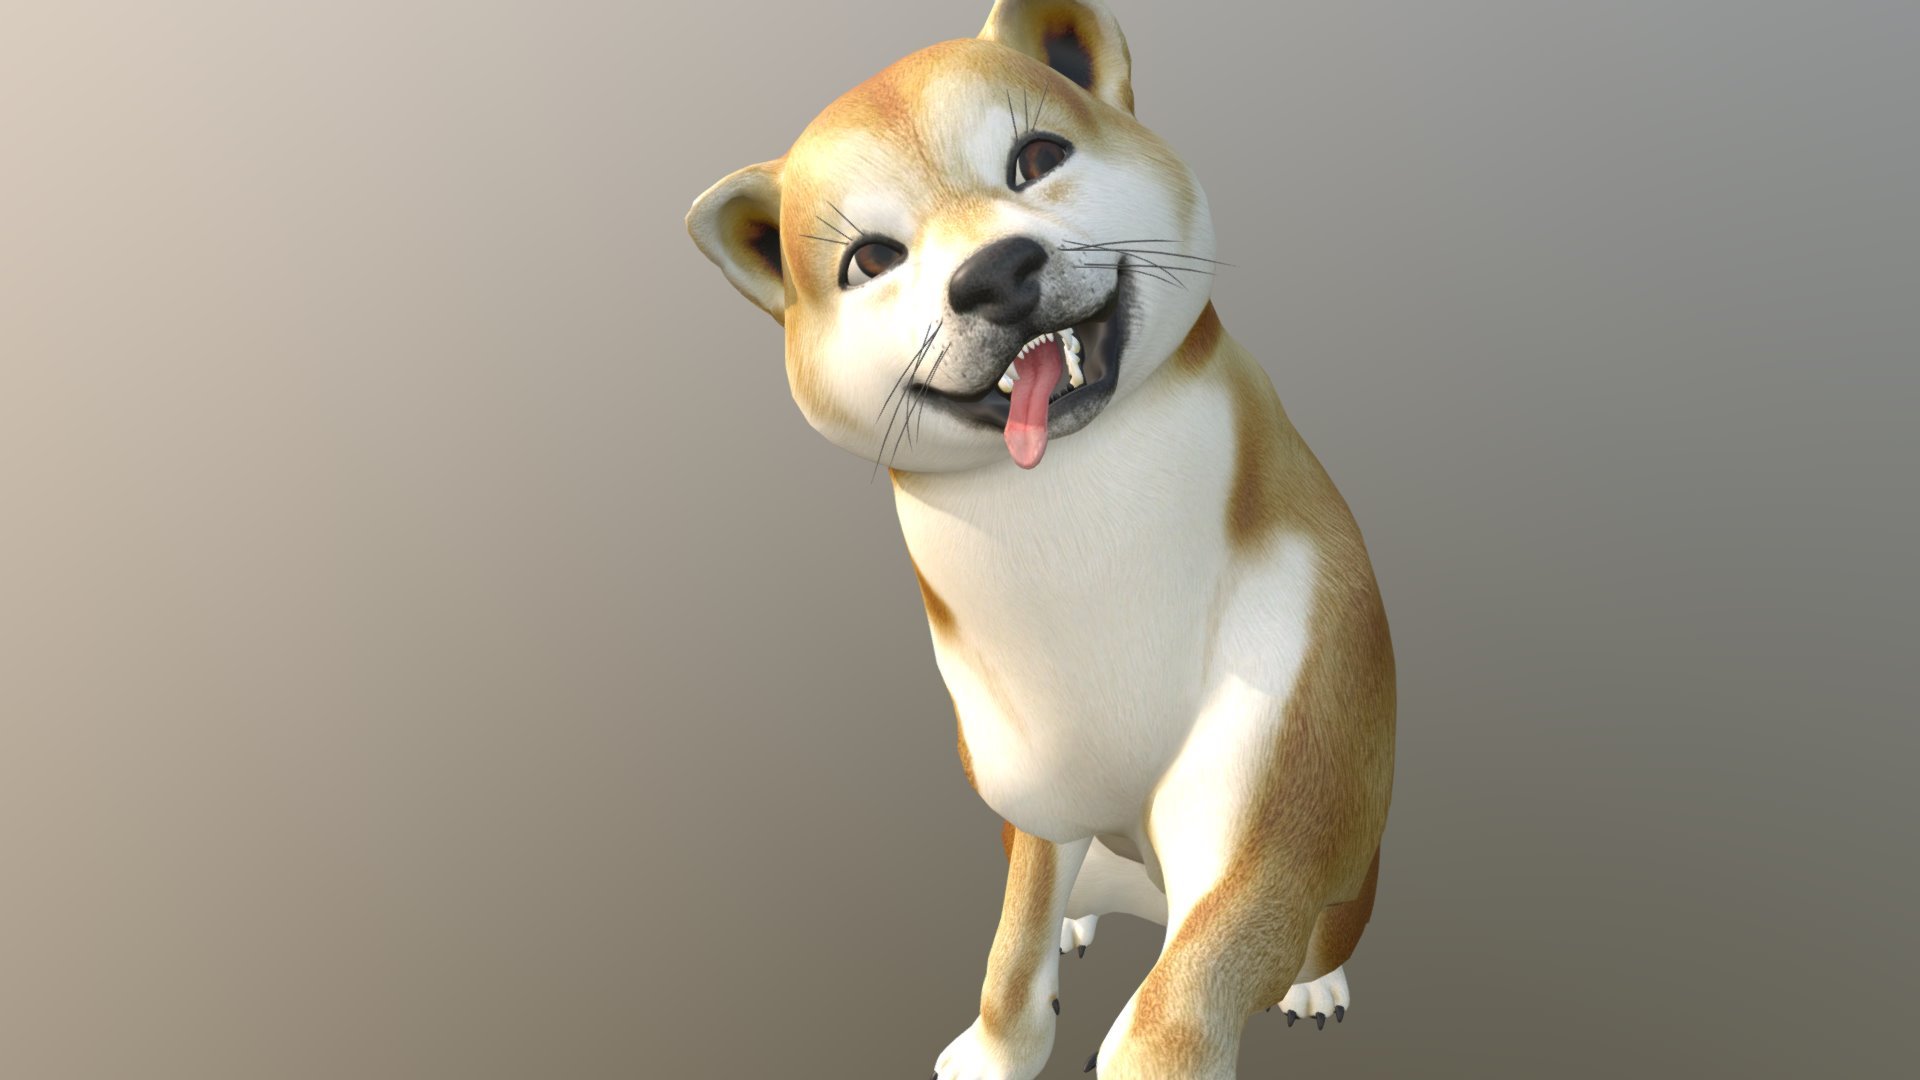 Isn't he cute? He's so cuddly. Don't you wanna squeeze him? Awww. I love dogs. You should too! Thanks for stopping by! - Shiba Inu Dog - 3D model by HardzGal 3d model